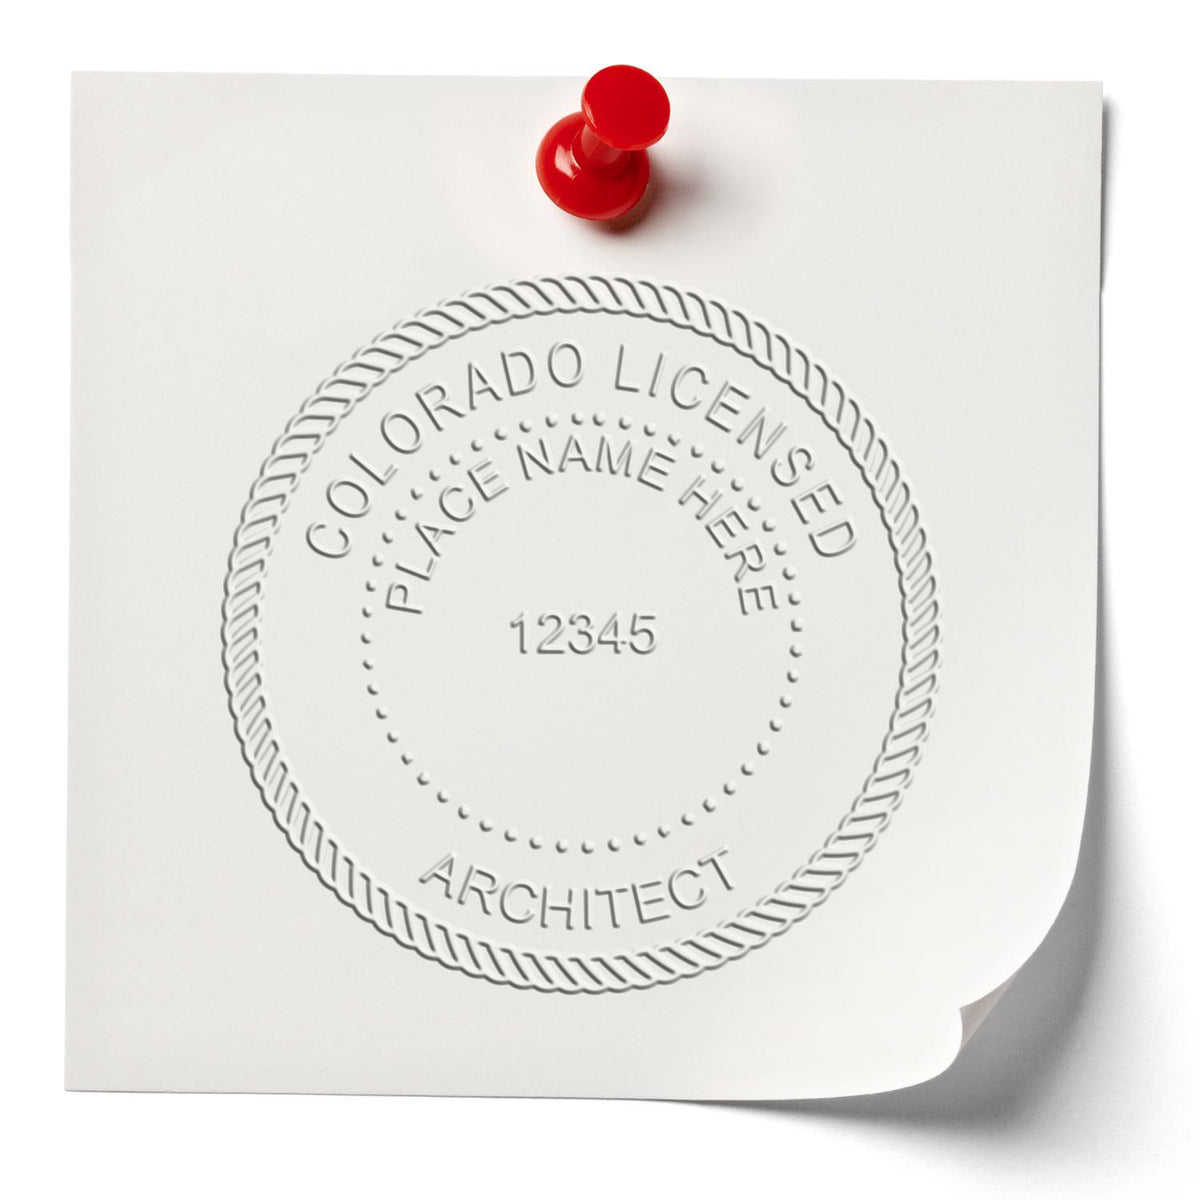 The State of Colorado Long Reach Architectural Embossing Seal stamp impression comes to life with a crisp, detailed photo on paper - showcasing true professional quality.